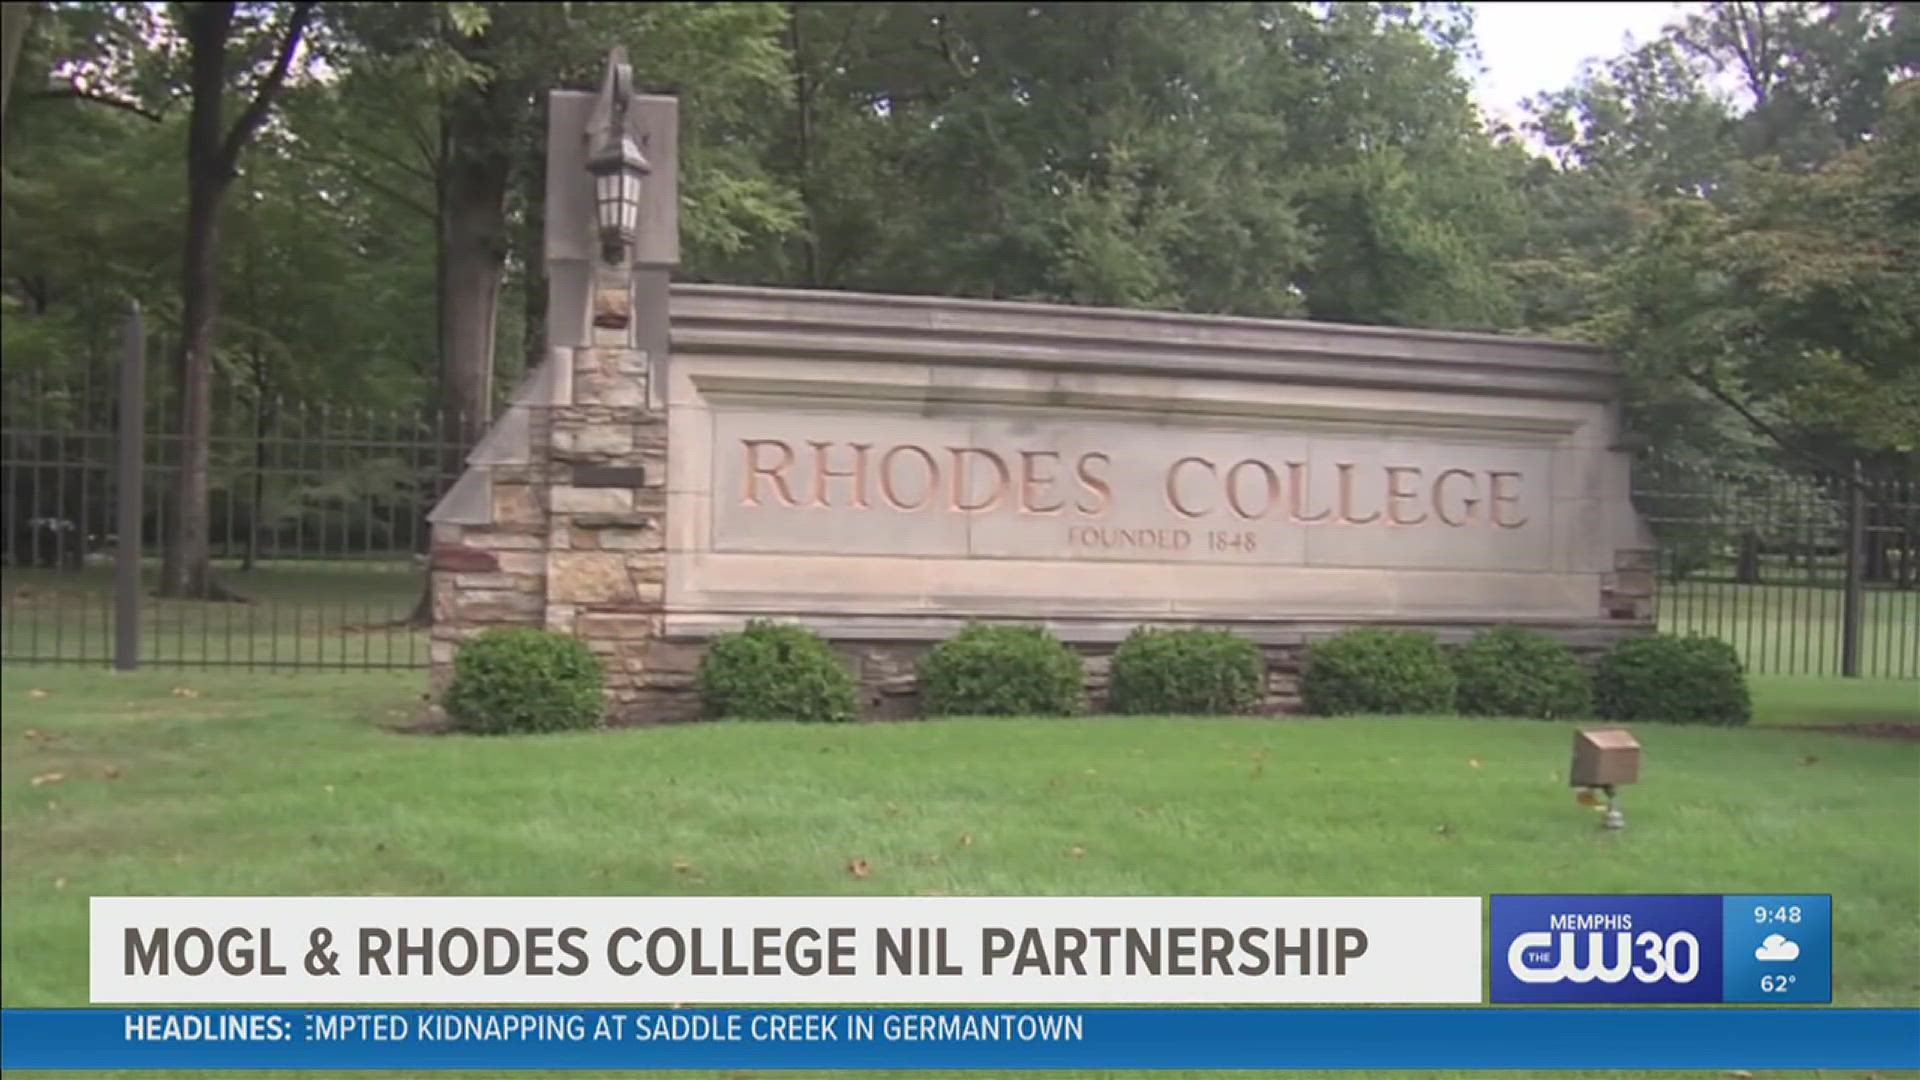 Rhodes College entered a new partnership with MOGL, and their athletes can now access NIL, building their individual brands.